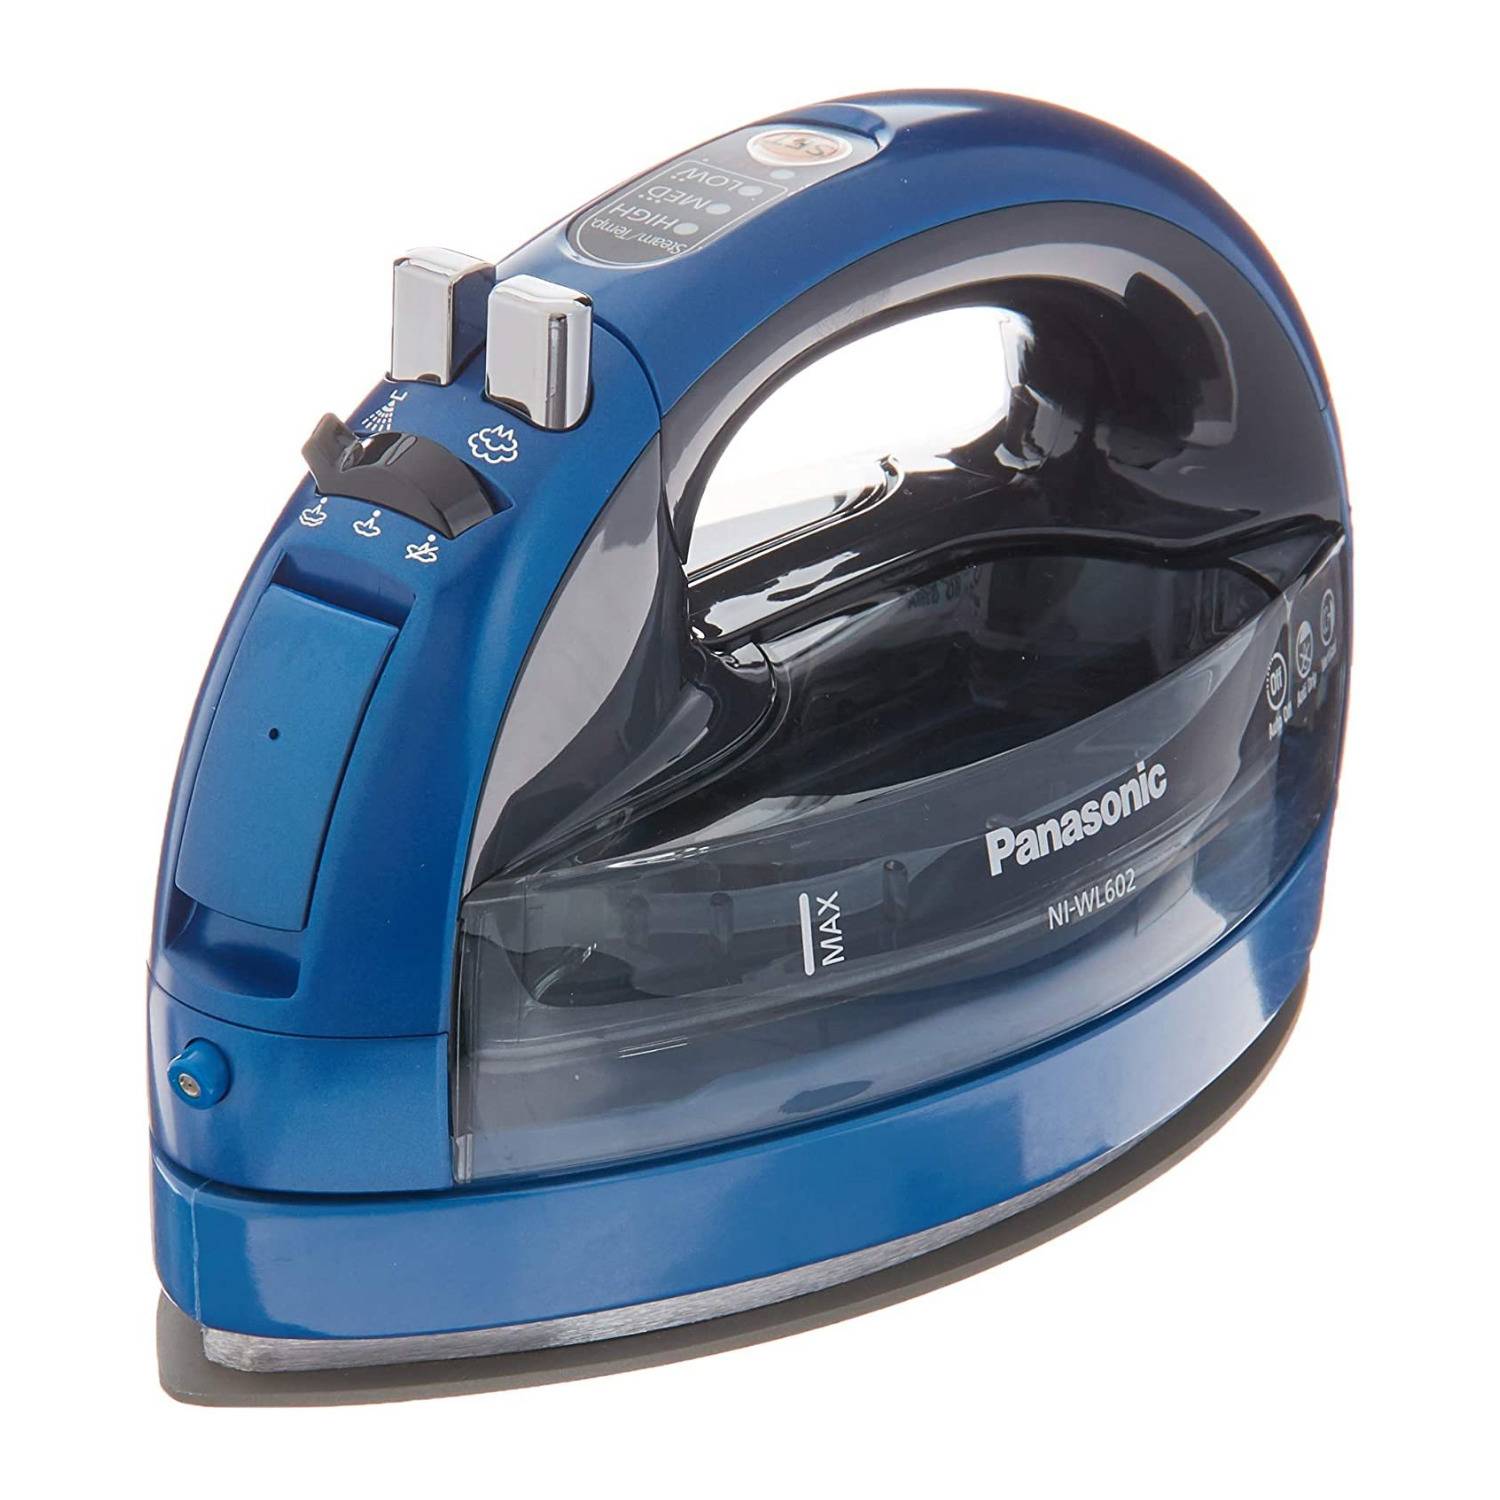 Panasonic Cordless 360-Degree Freestyle Steam/Dry Iron with Curved Ceramic Soleplate (Blue)